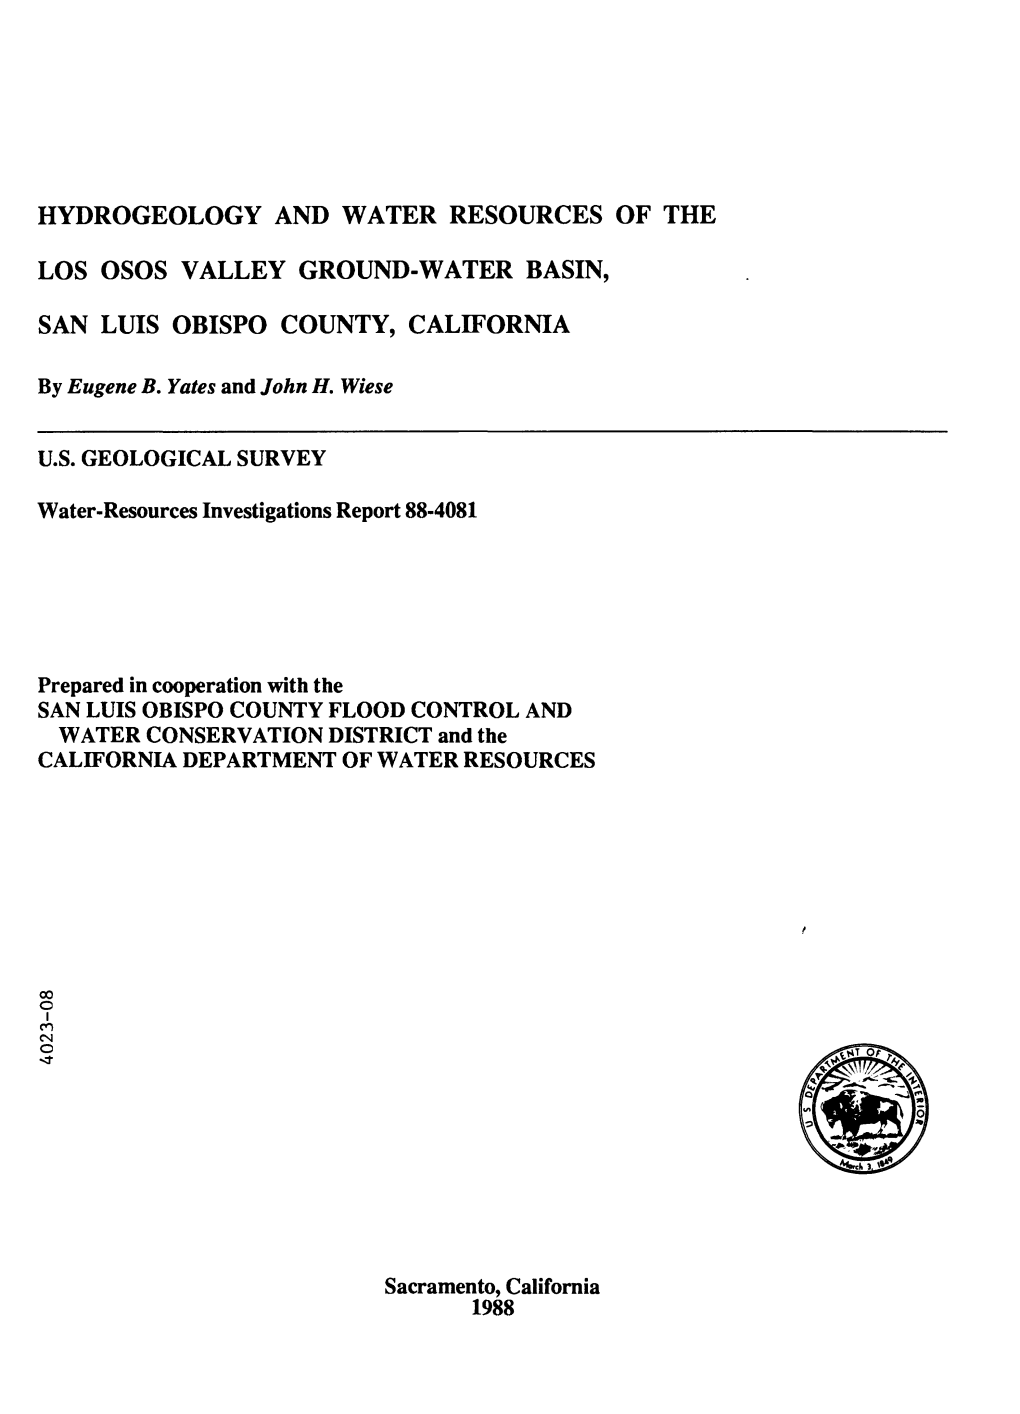 Hydrogeology and Water Resources of the Los Osos Valley Ground-Water Basin San Luis Obispo County, California